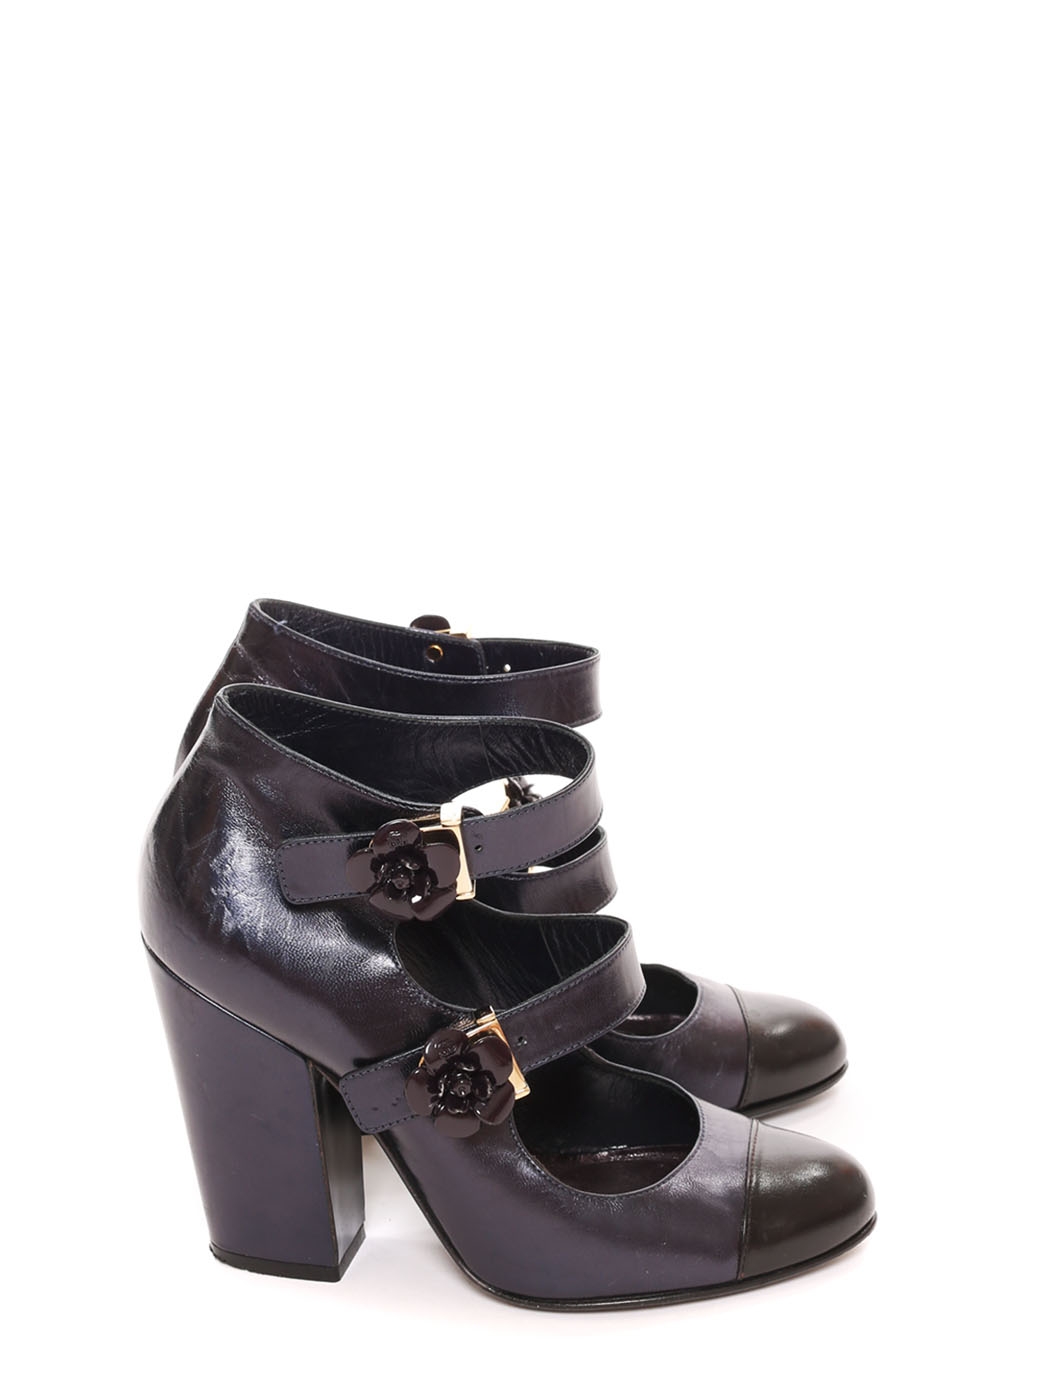 Boutique CHANEL Black patent leather lace-up ankle boots with round toe  Retail price €2000 size 38